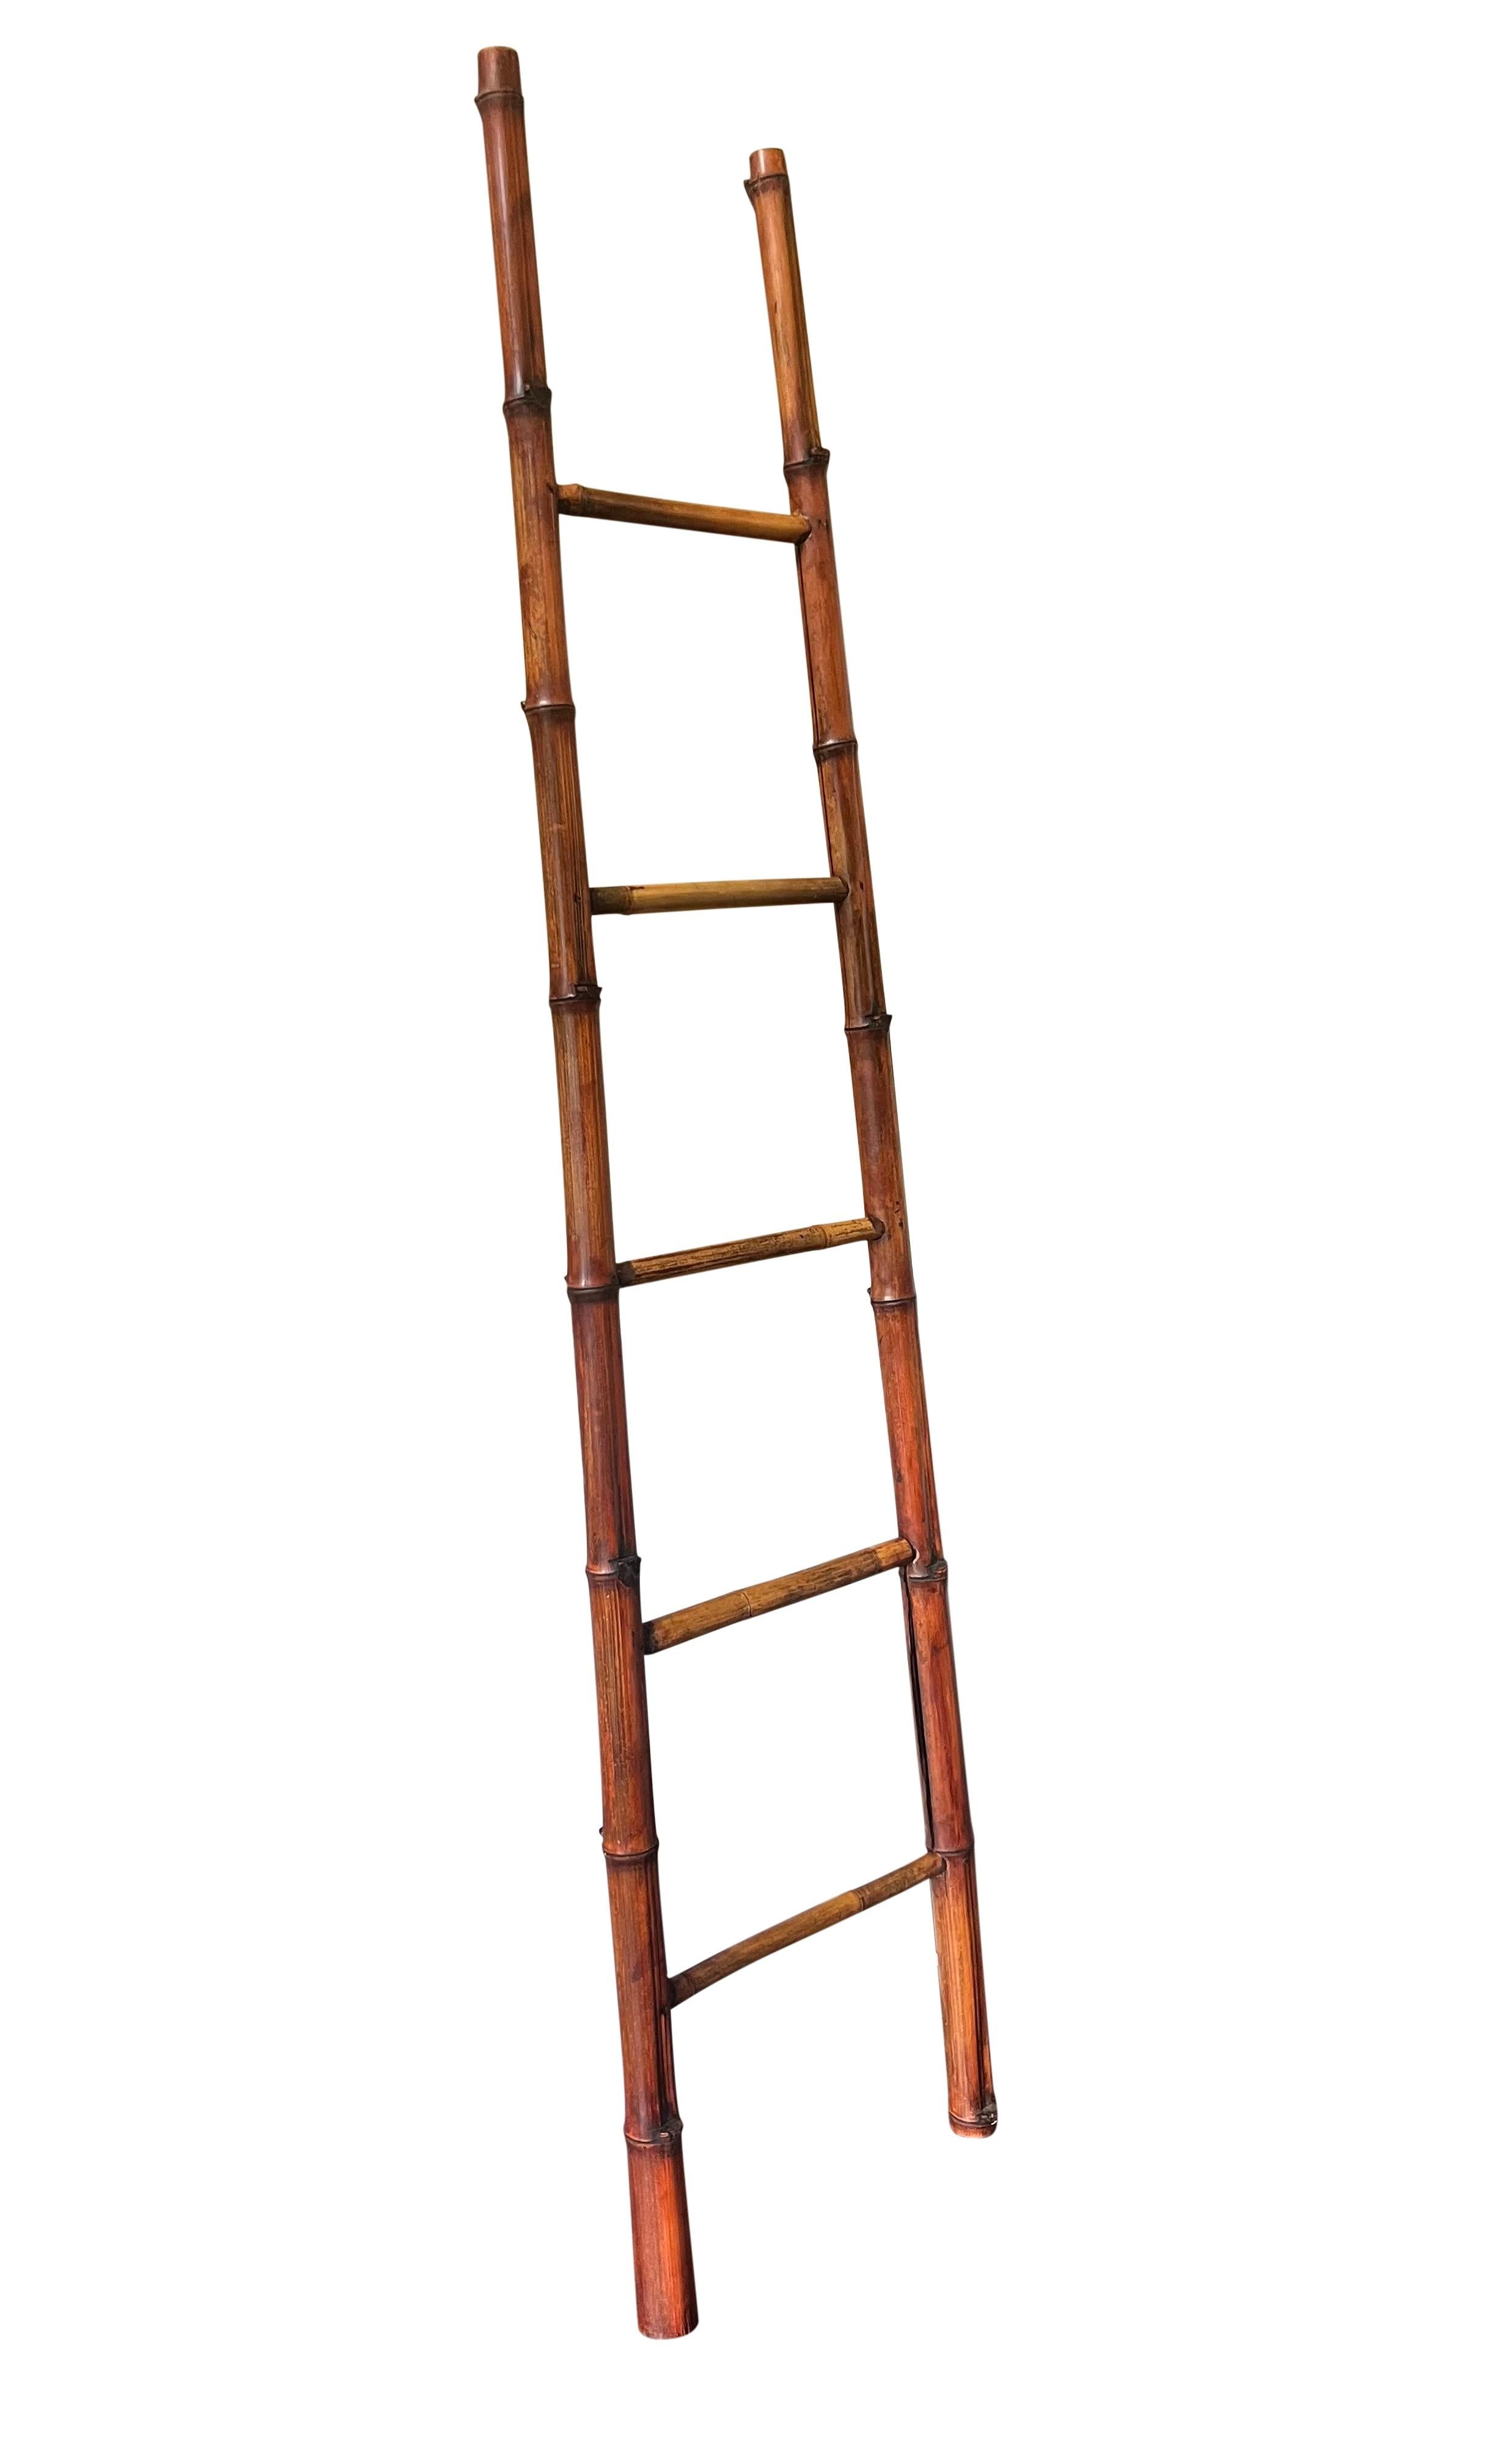 Vintage bamboo ladder, circa 1950's.

Beautiful ladder crafted of sturdy bamboo with a subtly tapered A frame. A simple design and nice patina. Sure to bring lots of character and rustic elegance to any room using minimal space. Great for displaying